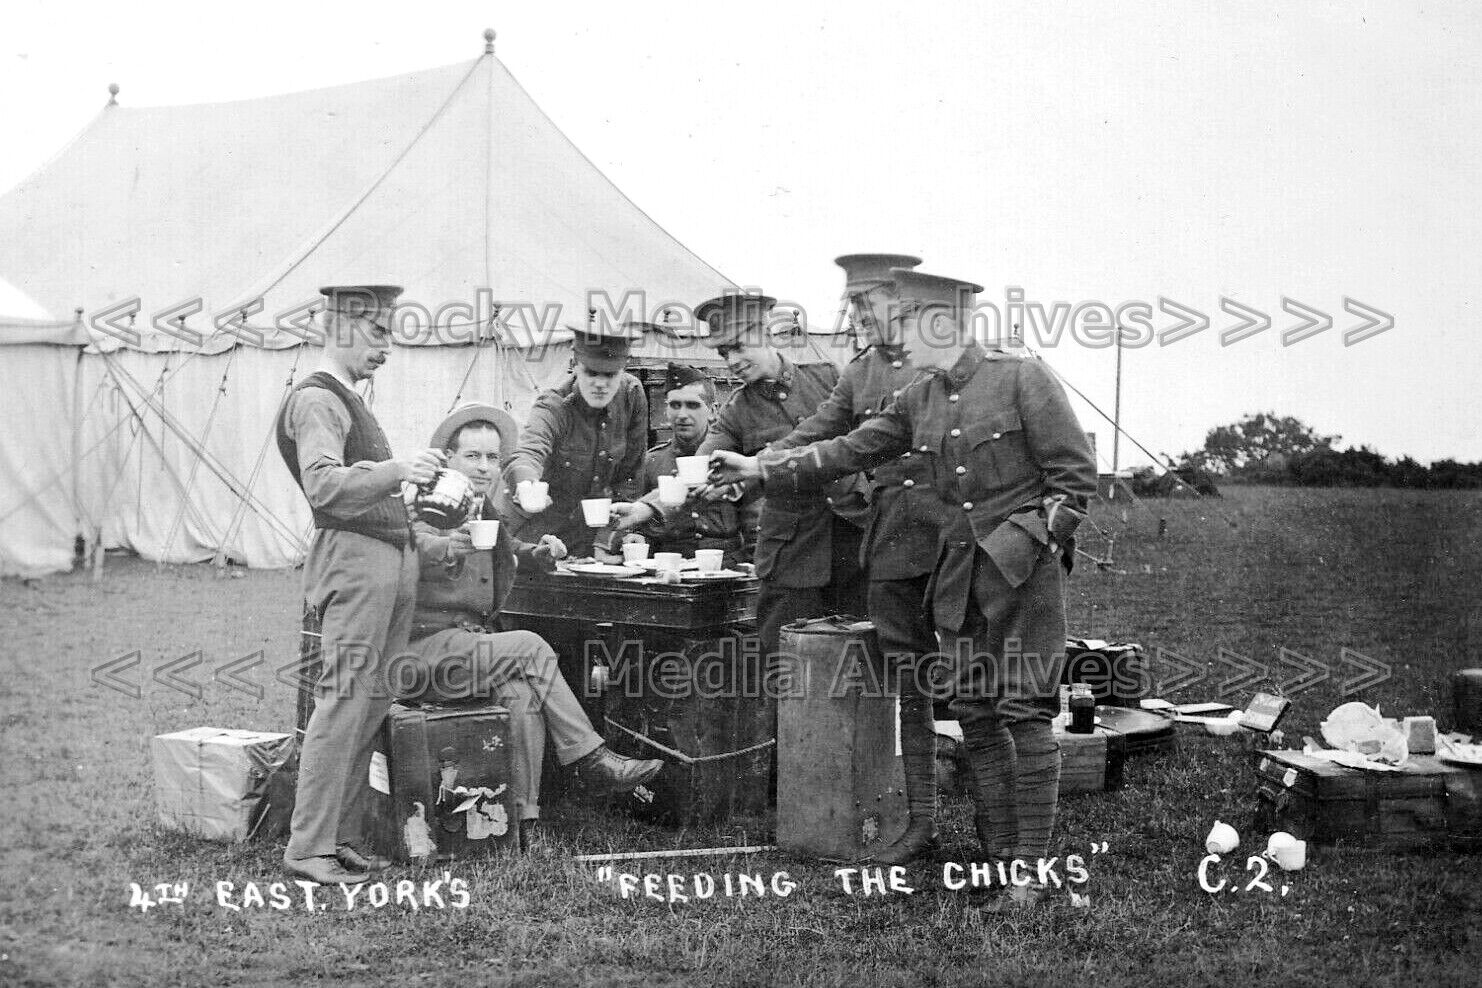 Agf-67 4th Battalion East Yorkshire Regiment, Mess Time 1912. Photo